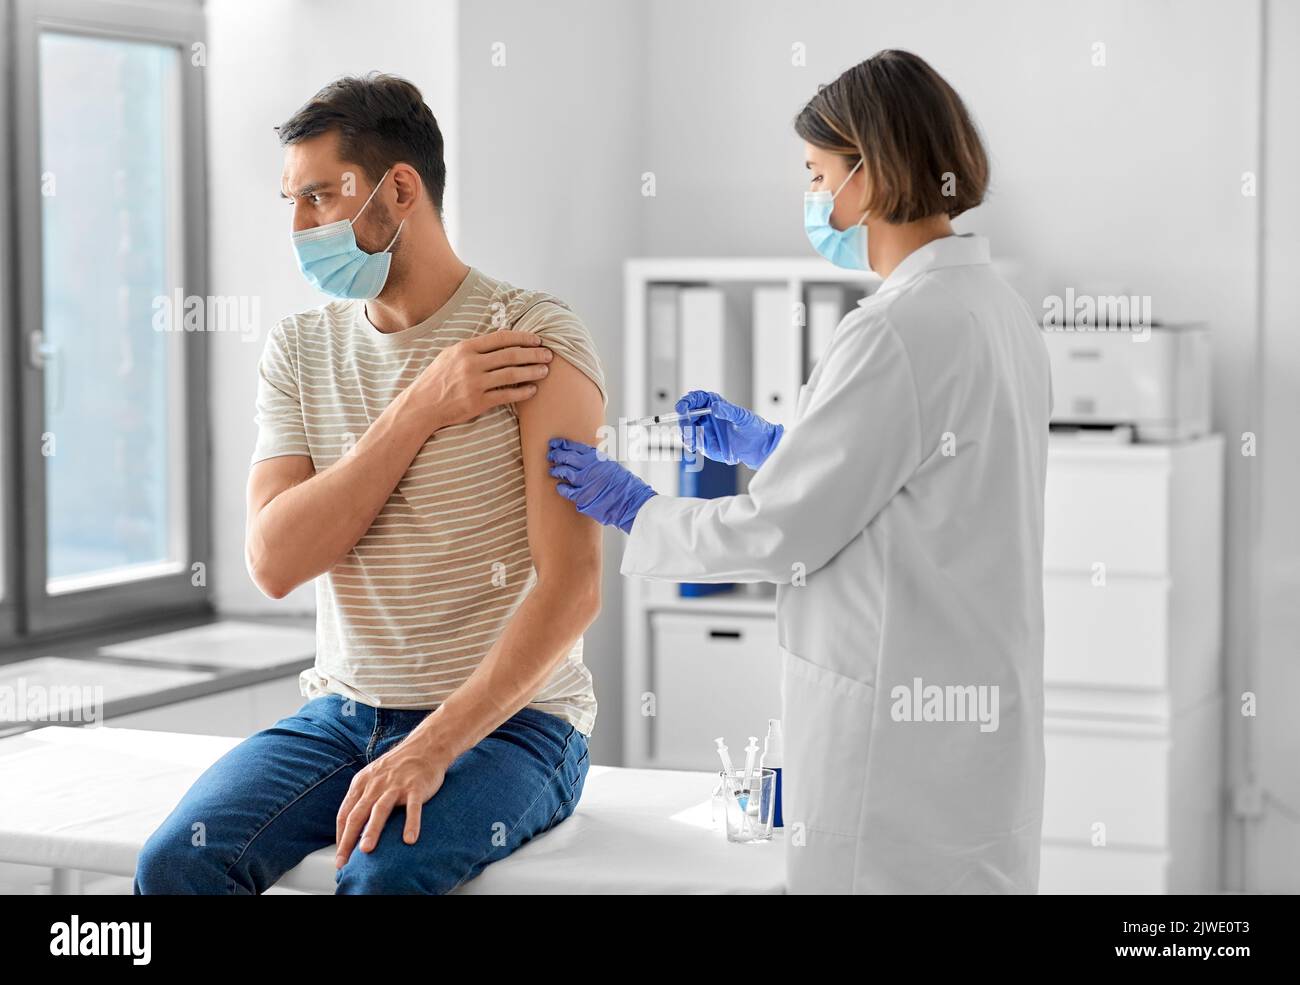 doctor with syringe vaccinating male patient Stock Photo